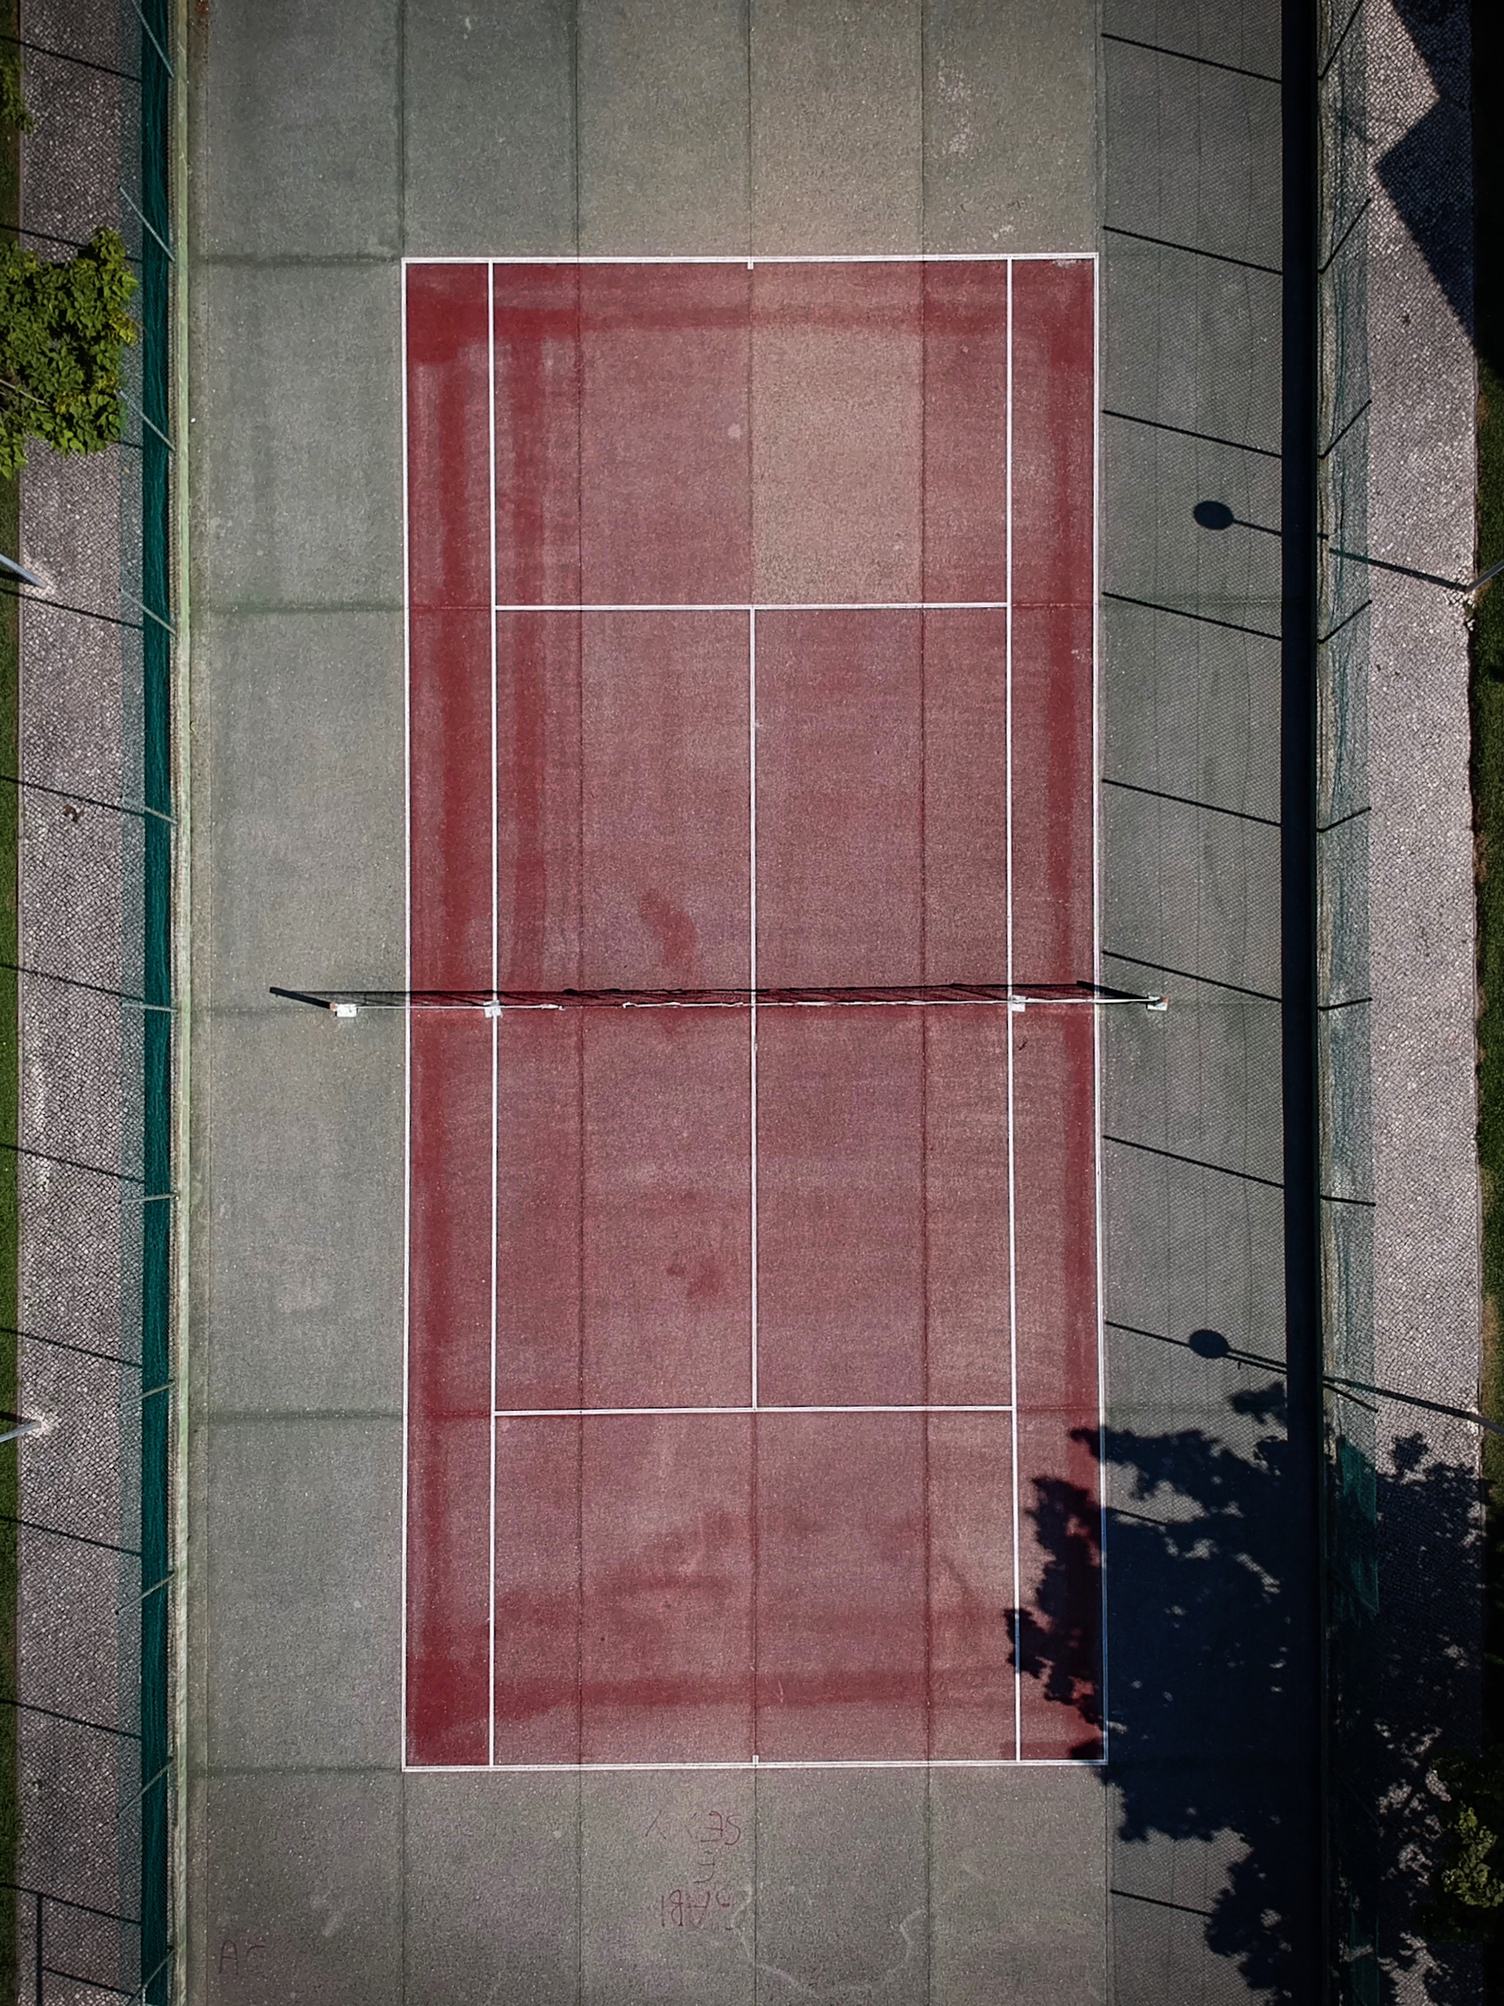 Drone View of Old Tennis Court